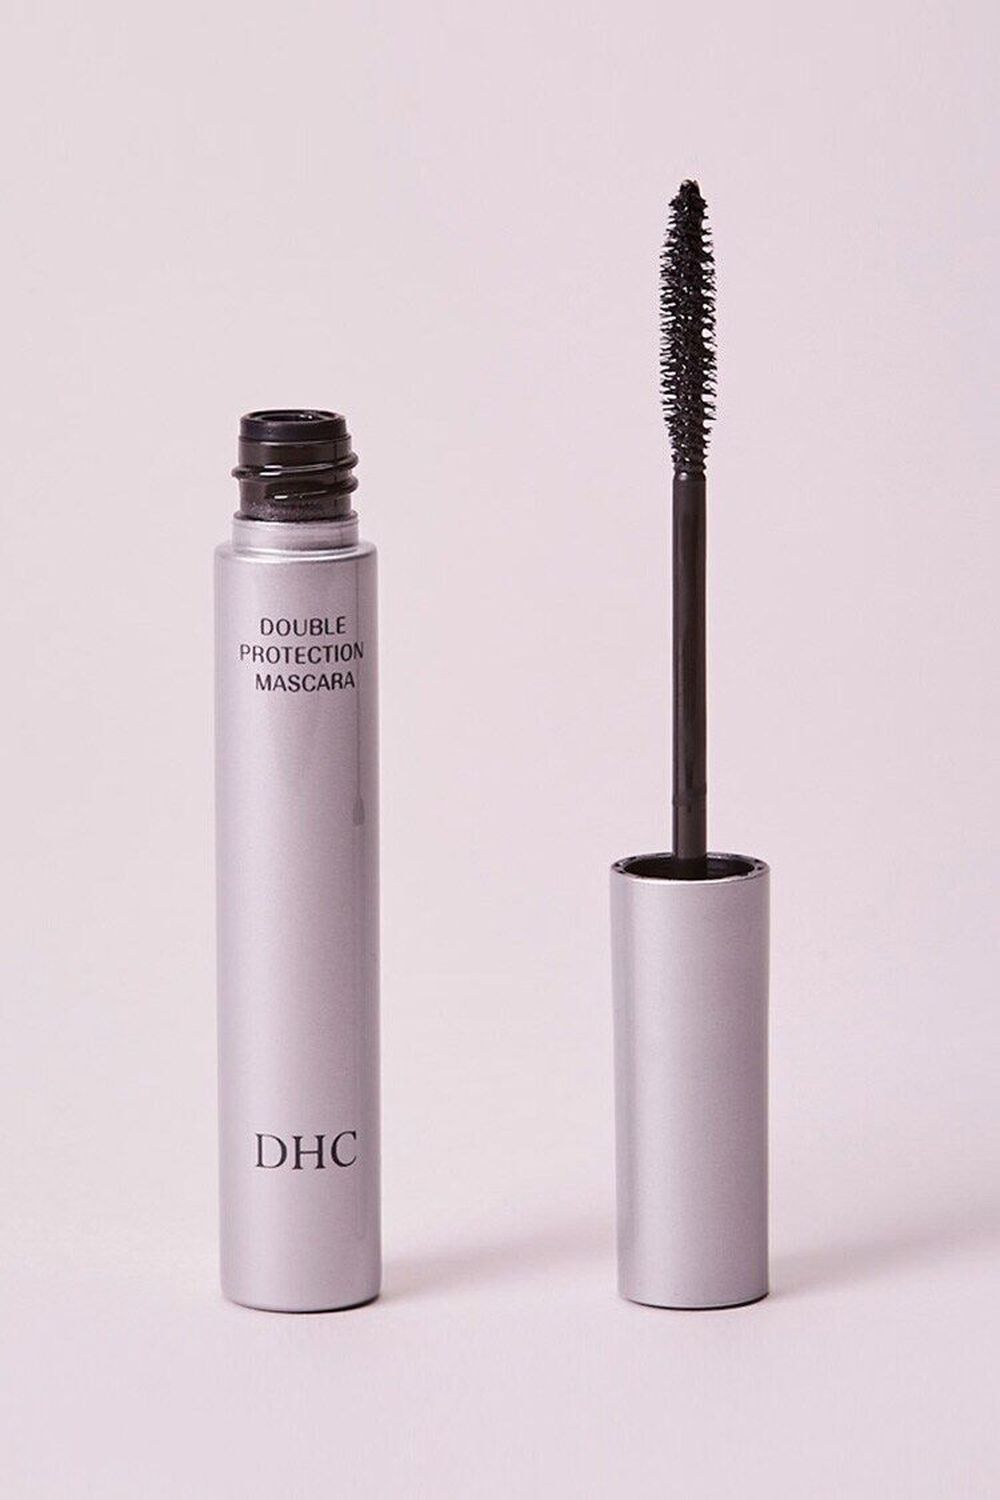 DHC Mascara Perfect Pro Double Protection, image 1